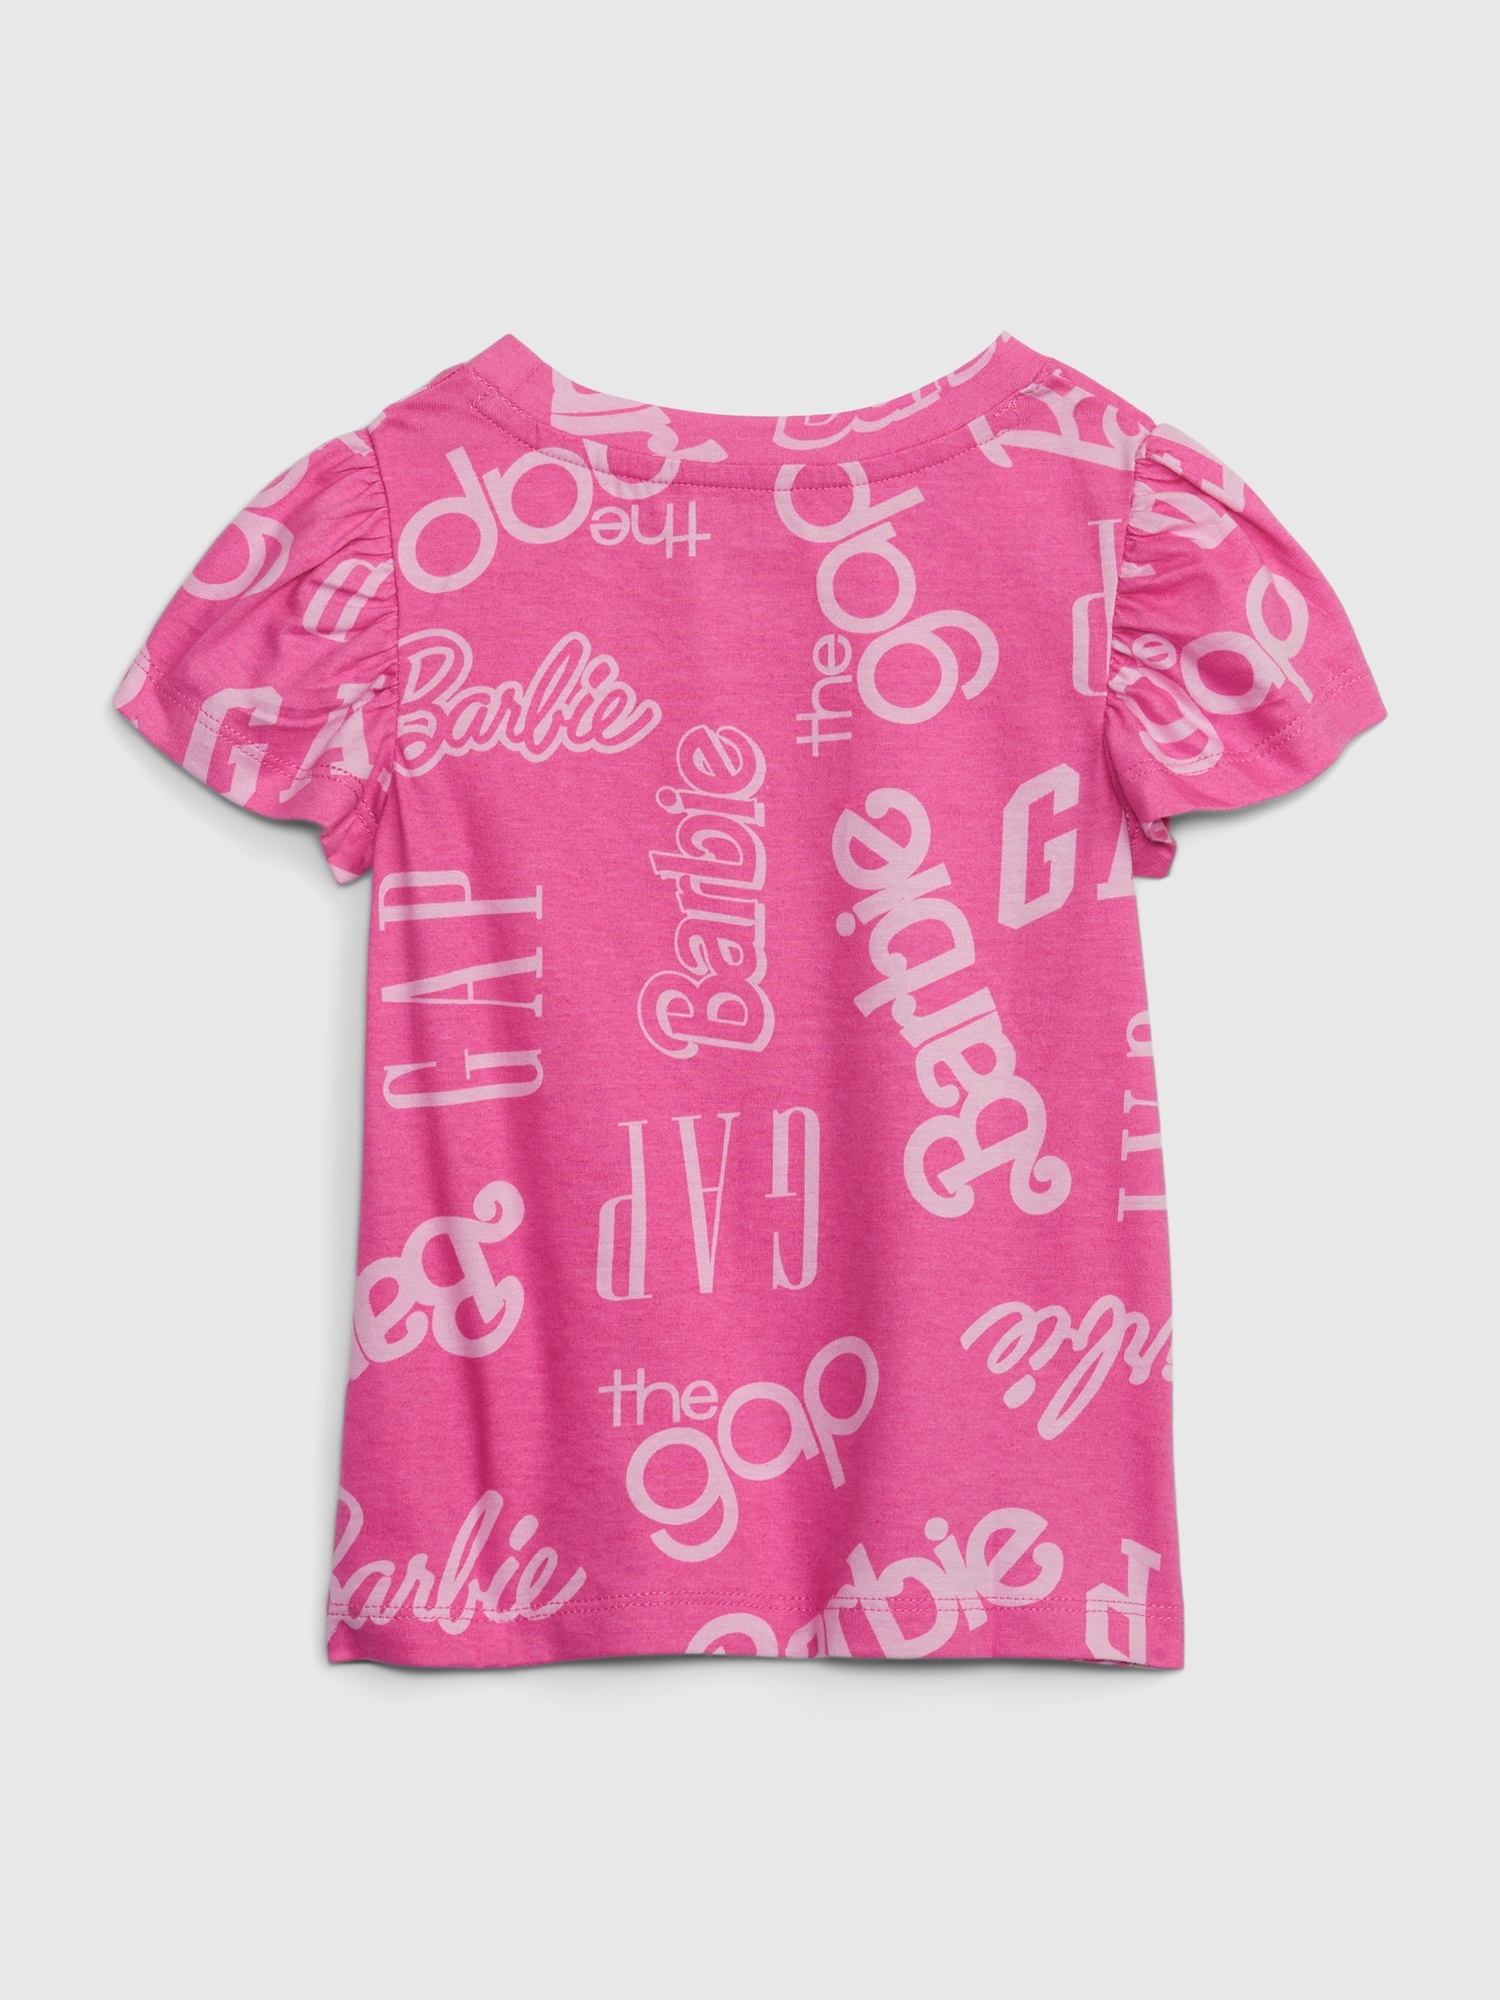  Barbie Toddler Girls T-Shirt and Pants Pink/Black 2T: Clothing,  Shoes & Jewelry